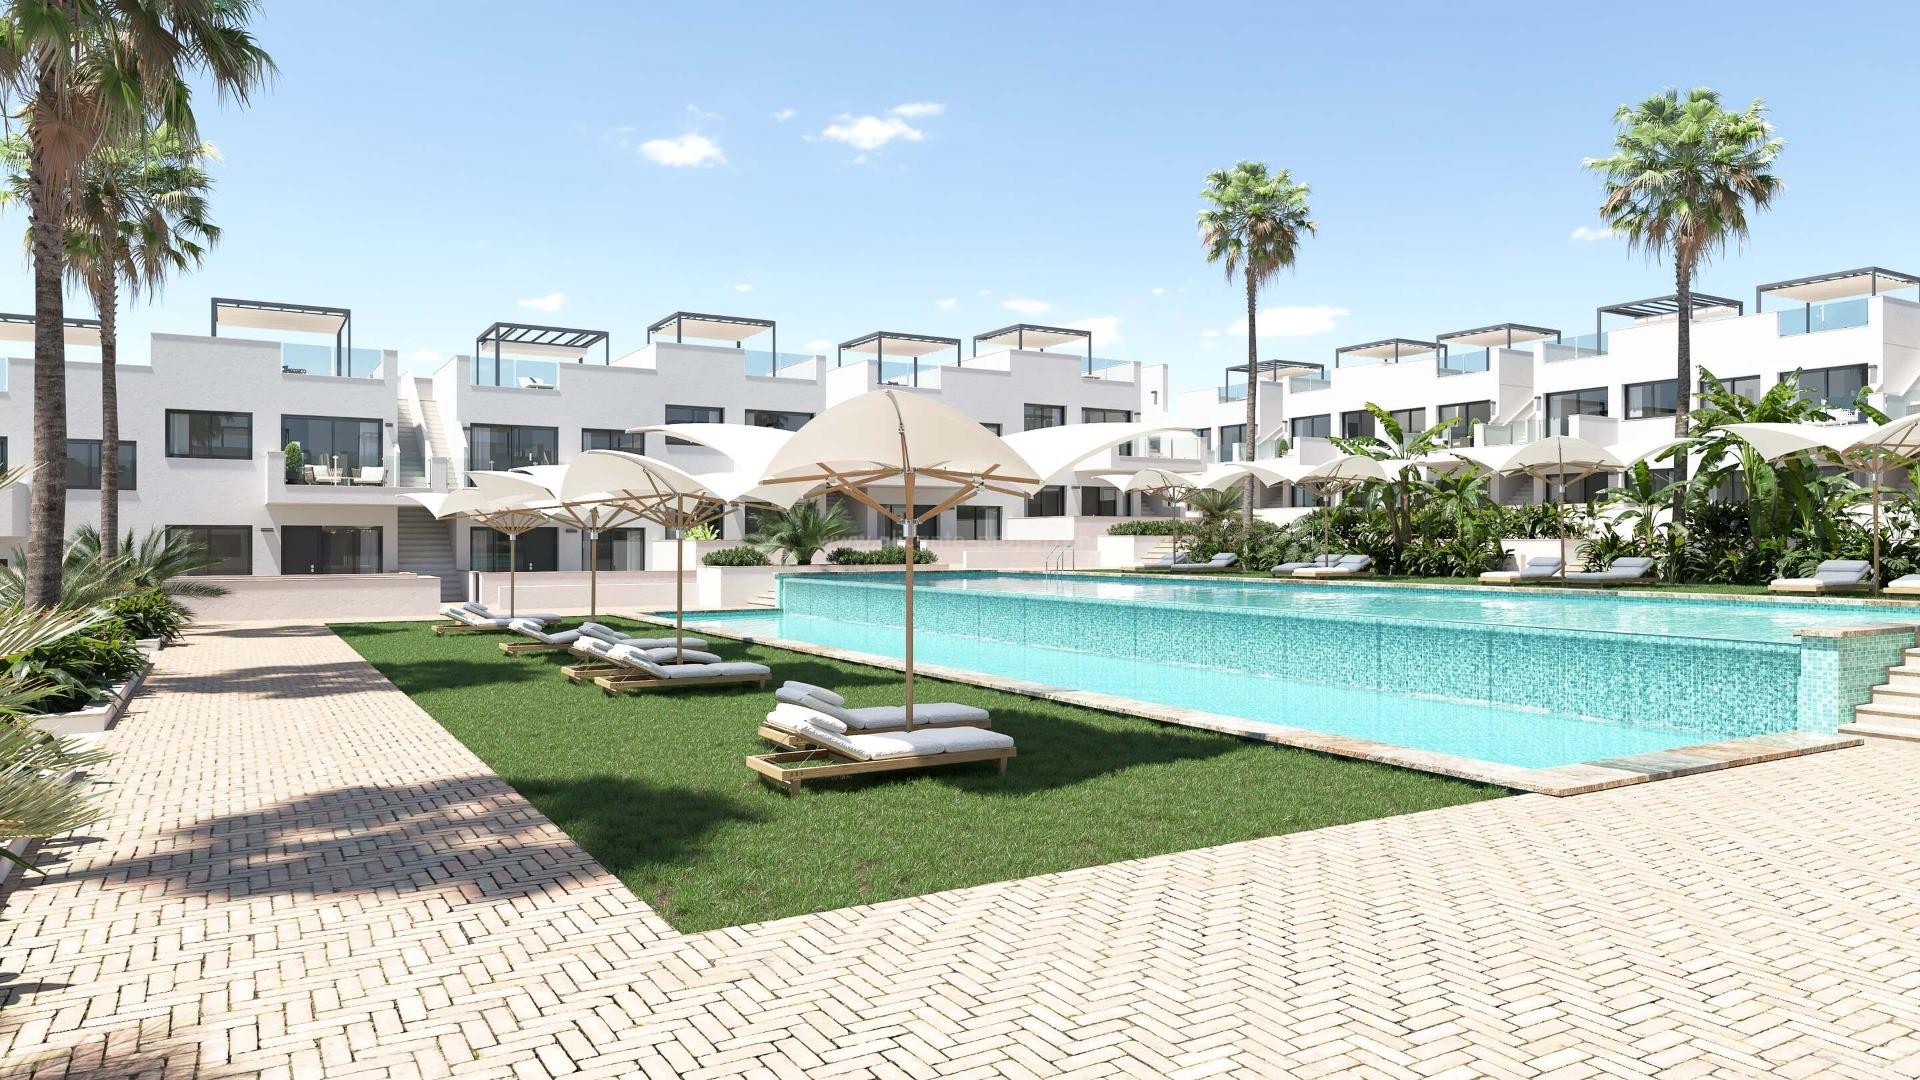 Bungalow apartments in Los Balcones at Torrevieja, 2 bedrooms and 2 bathrooms, all apartments have spectacular views of Torrevieja's pink lagoon